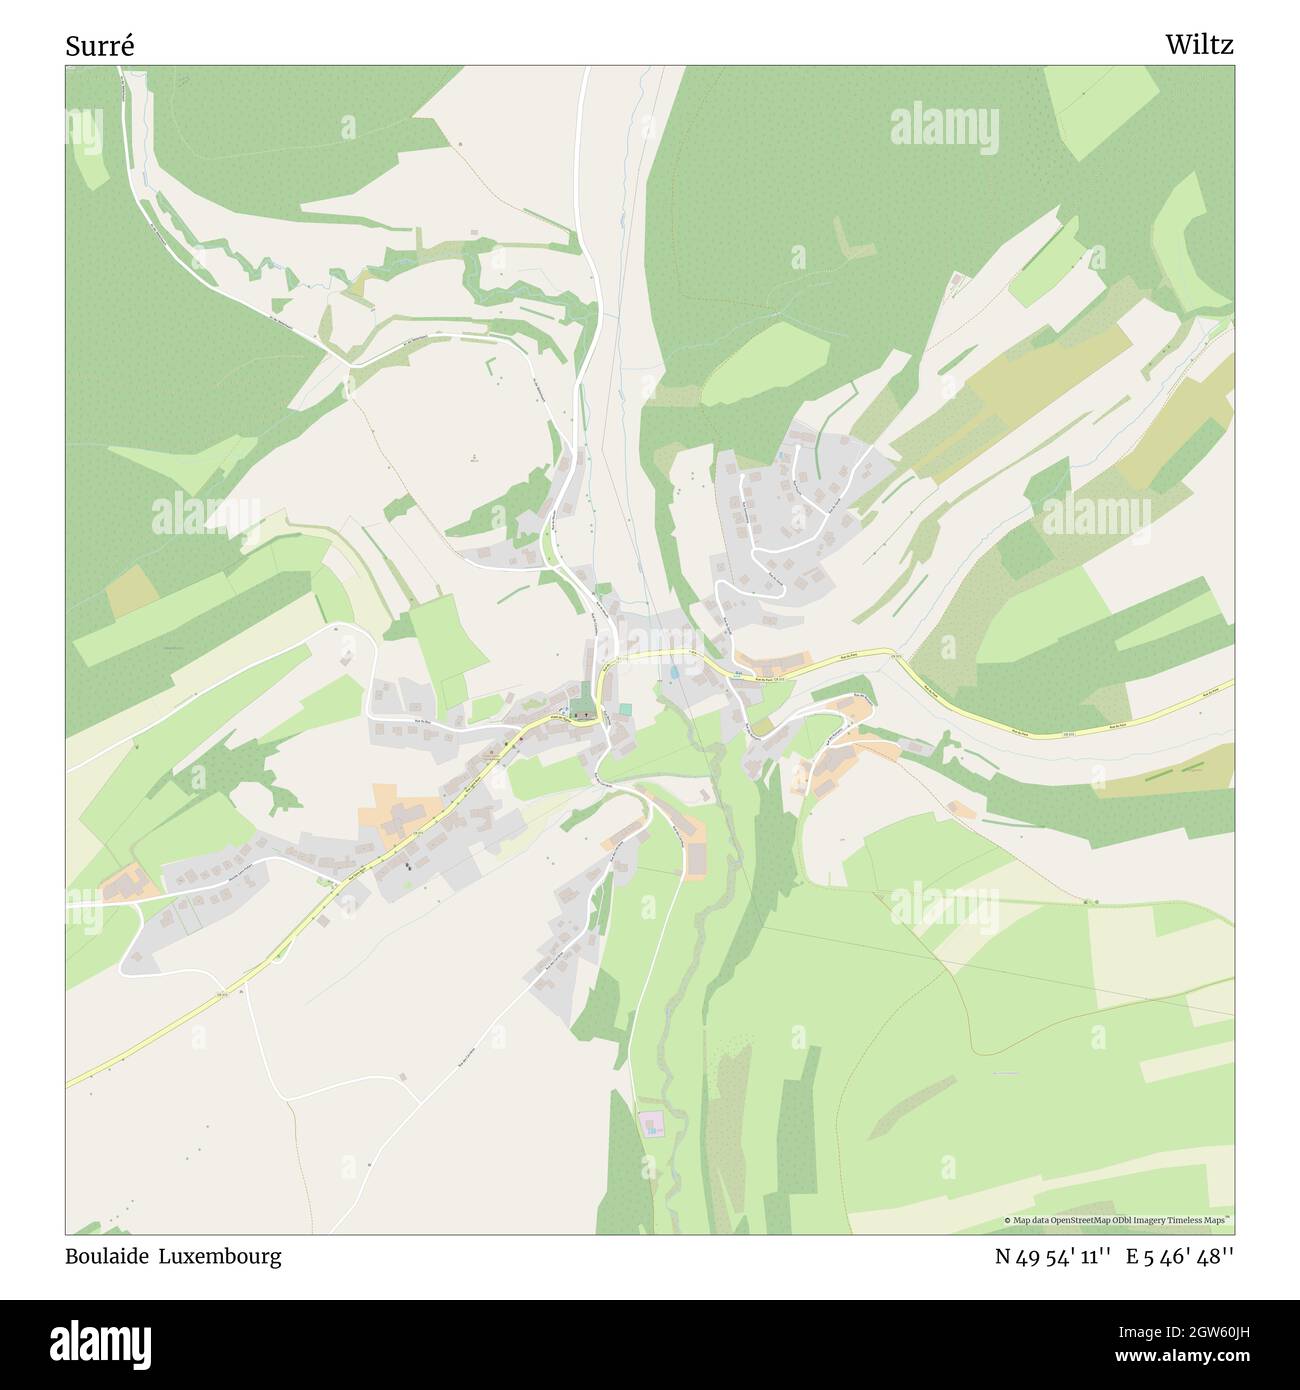 Surré, Boulaide, Luxembourg, Wiltz, N 49 54' 11'', E 5 46' 48'', map, Timeless Map published in 2021. Travelers, explorers and adventurers like Florence Nightingale, David Livingstone, Ernest Shackleton, Lewis and Clark and Sherlock Holmes relied on maps to plan travels to the world's most remote corners, Timeless Maps is mapping most locations on the globe, showing the achievement of great dreams Stock Photo